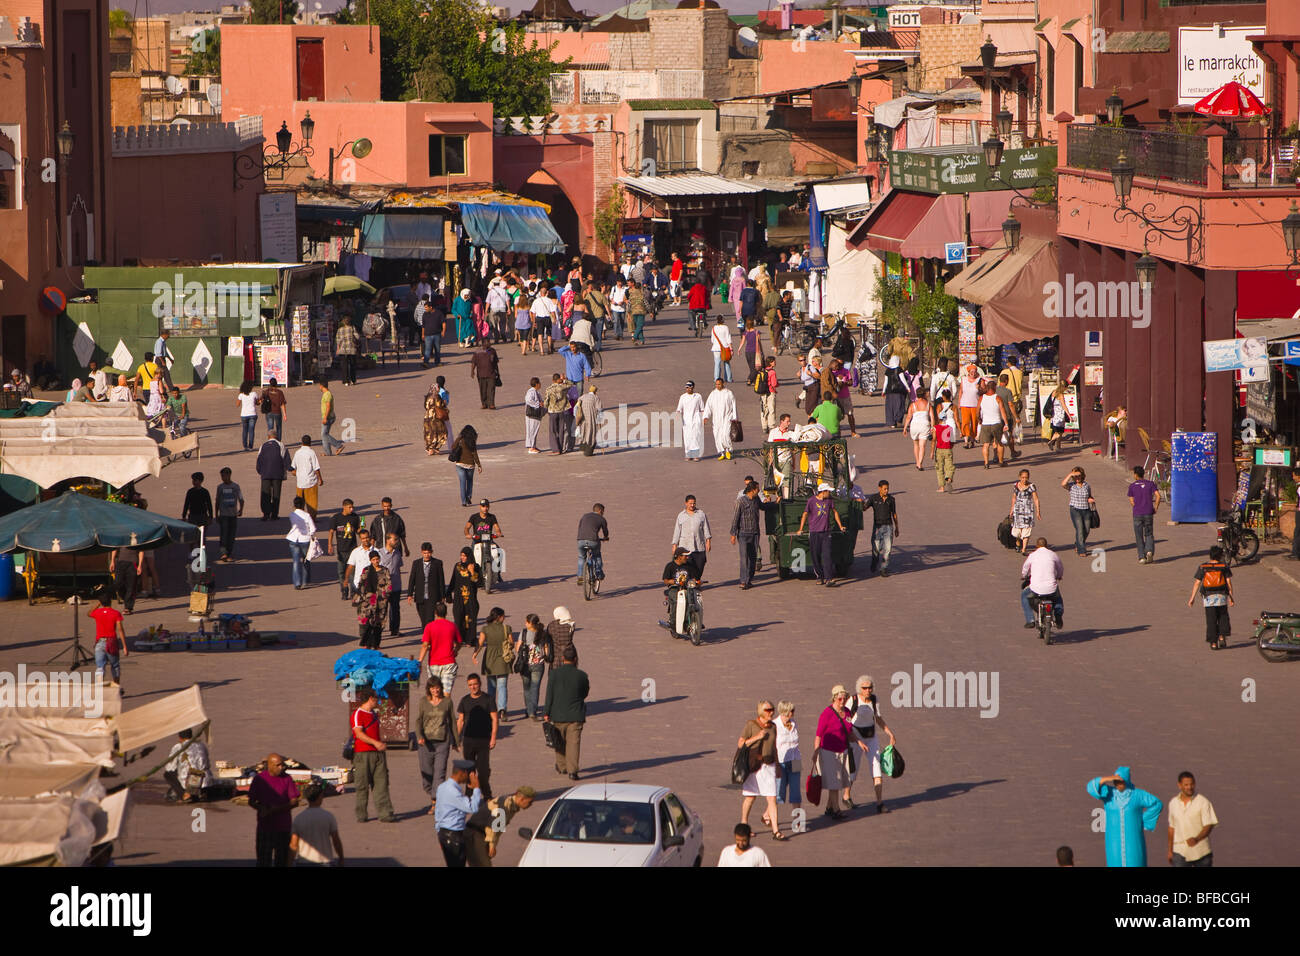 MARRAKESH, MOROCCO - People at the Djemaa el-Fna main square in the medina. Stock Photo